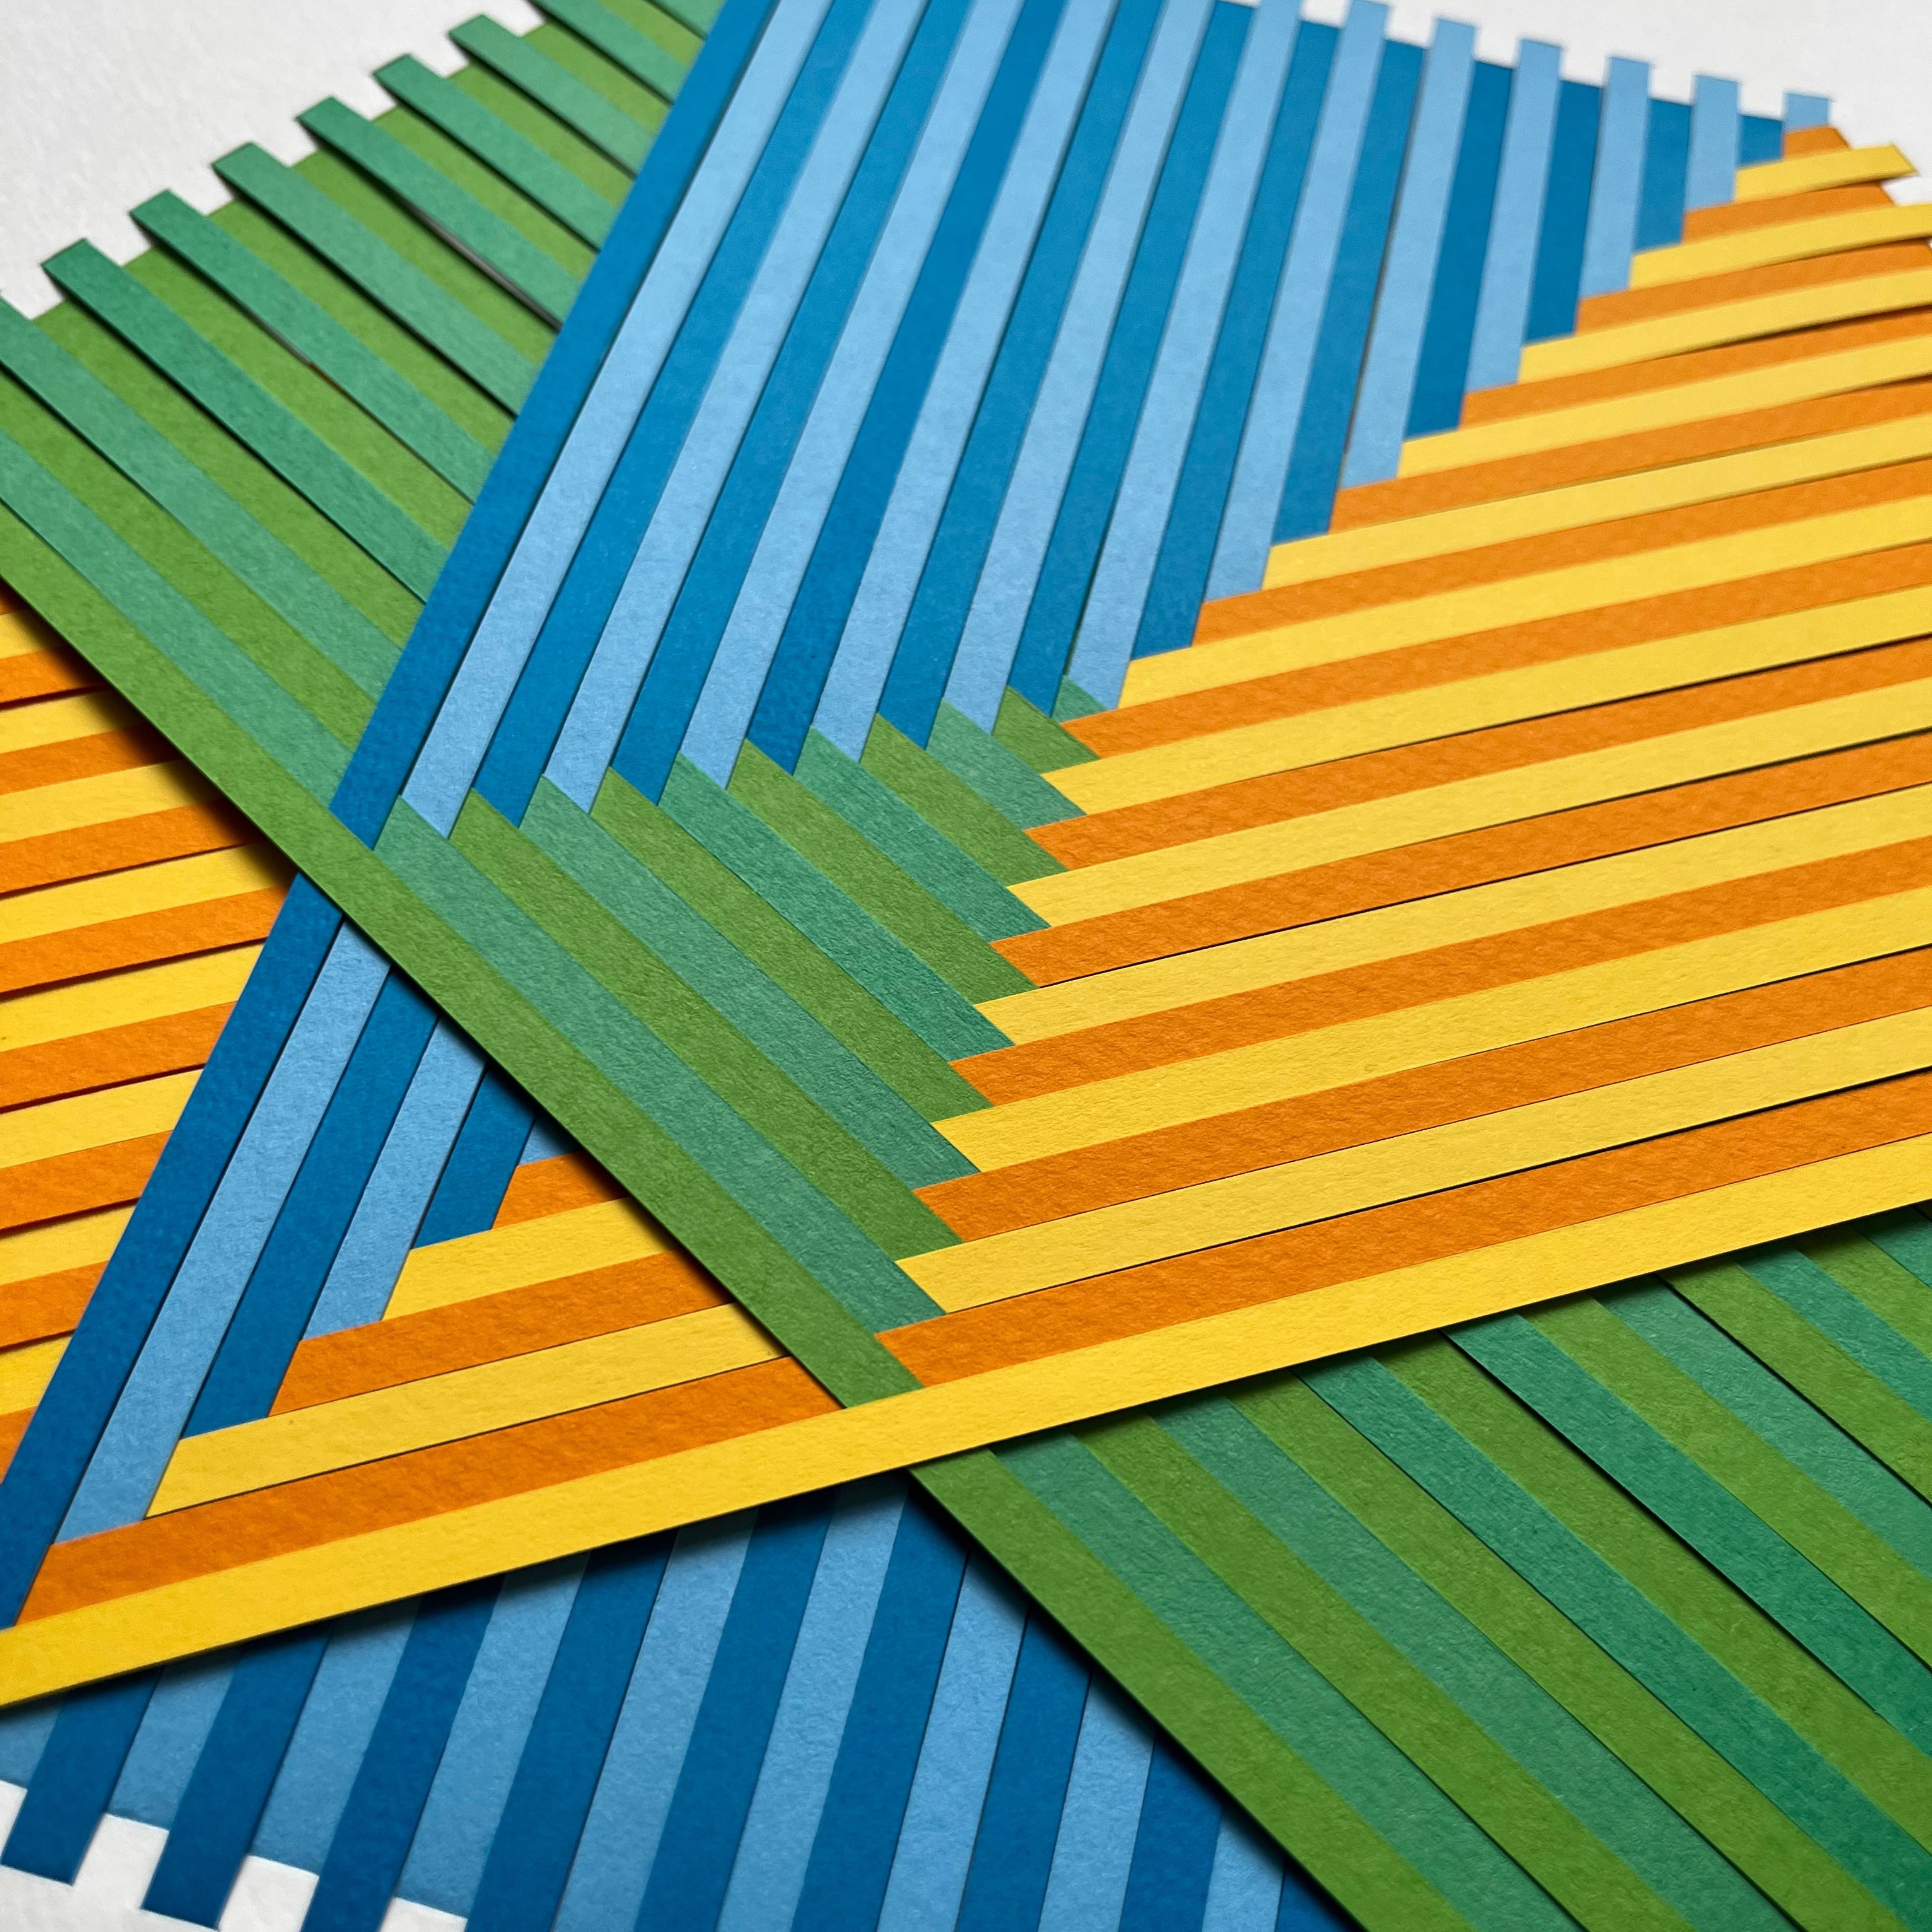 yellow, green, and blue paper strips, layered into a hexagonal shape